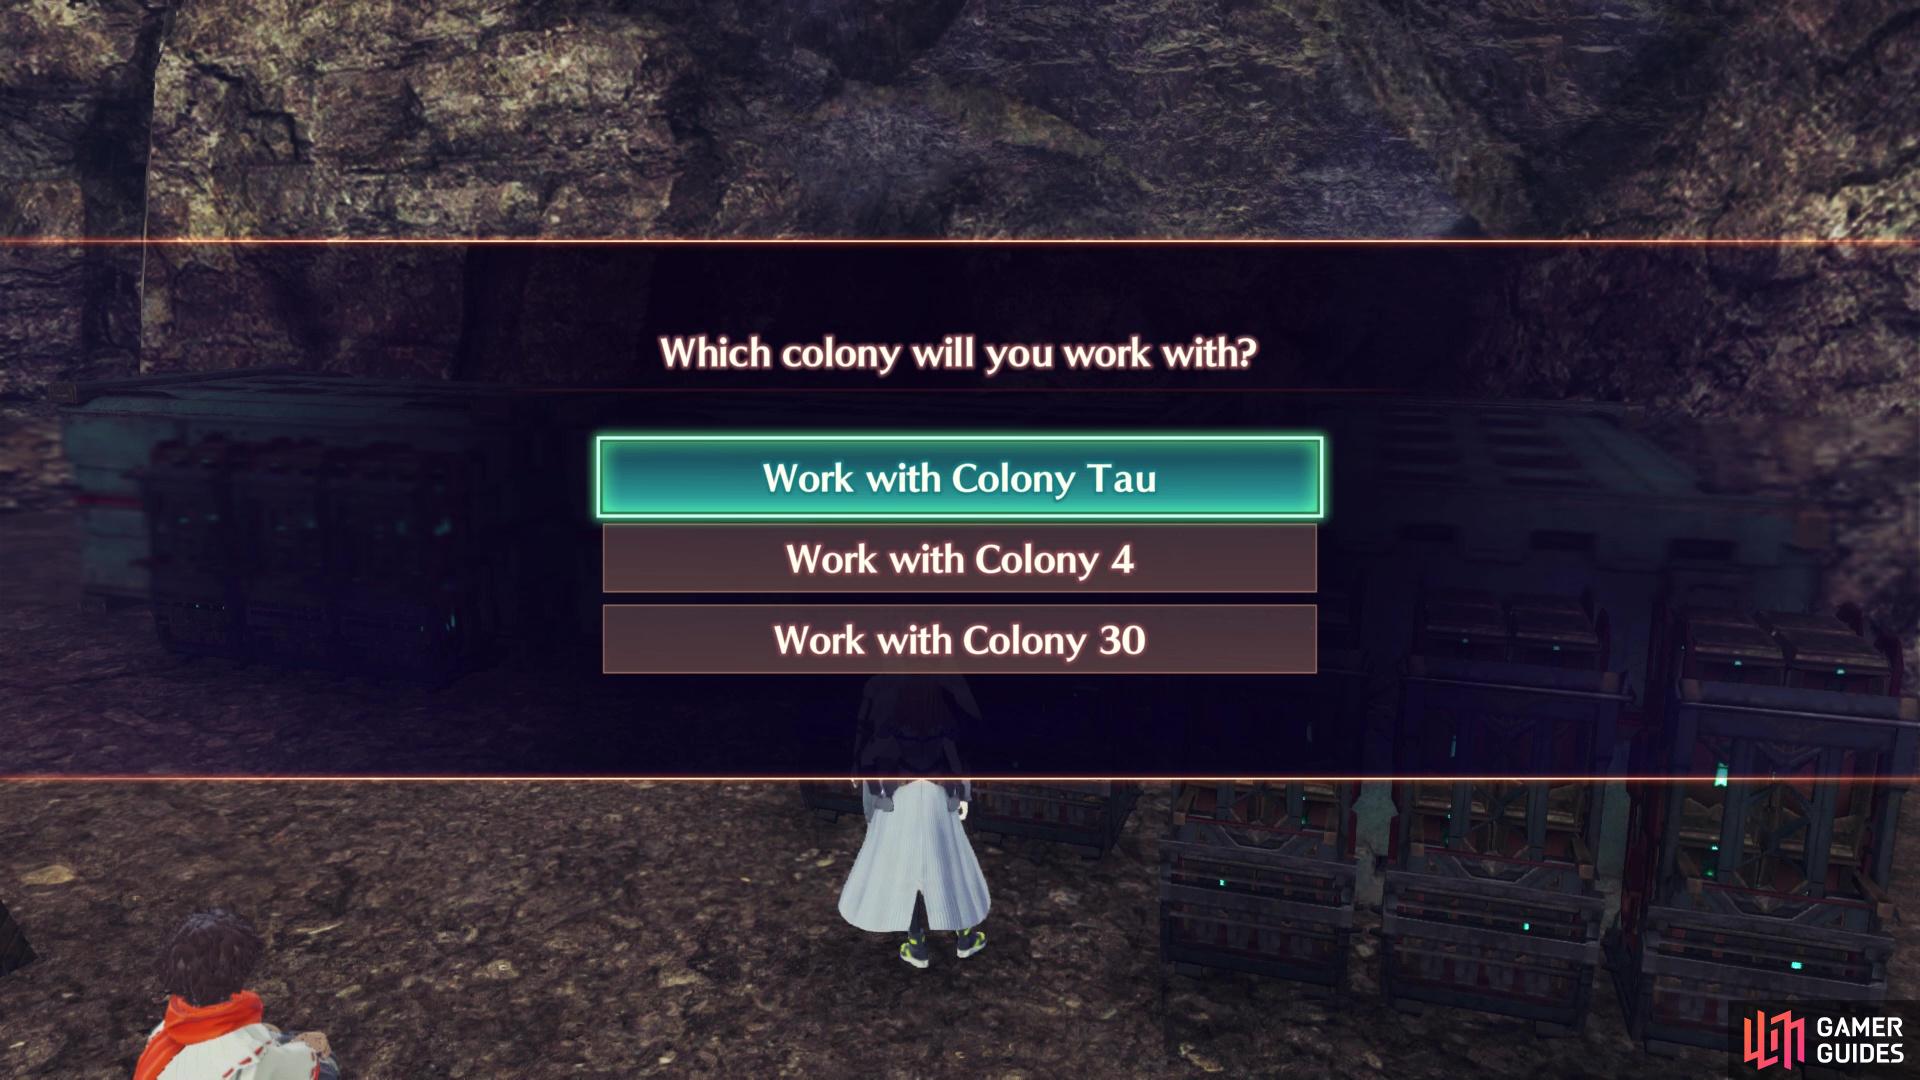 There's really no wrong answers in this quest, as you will be allowed to pick another option